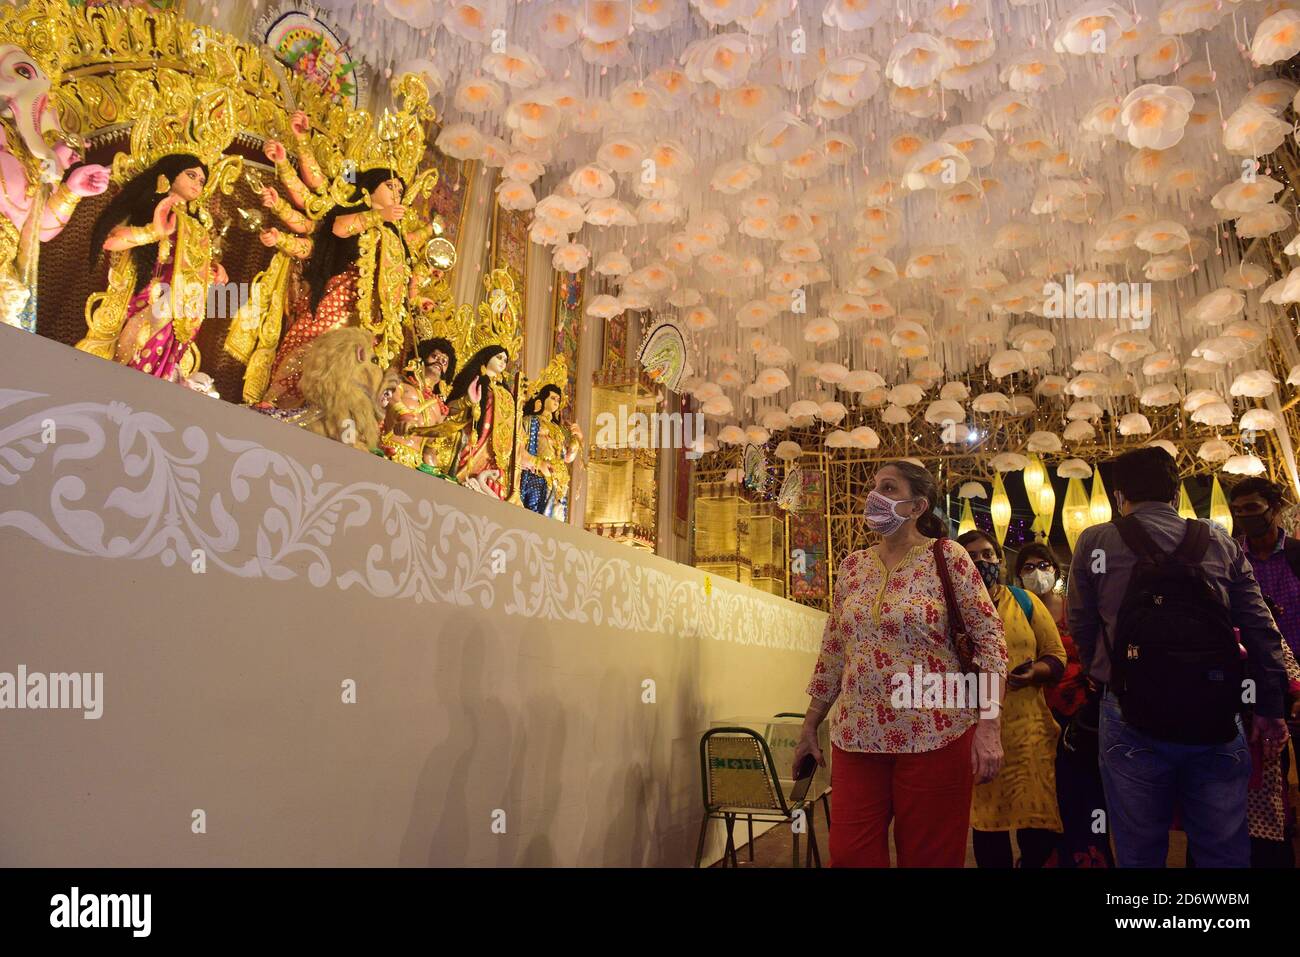 A woman wearing a facemask  is seen looking up at the idol of goddess Durga at Puja Pandal in Kolkata. Kolkata High Court ordered this evening that all puja pandals will be considered as No entry and containment zones. Only a selective number of Puja committee members will be allowed inside however with 5-meter distance from small pandals and 10-meters from big pandal barricade to control the huge number of people. Stock Photo